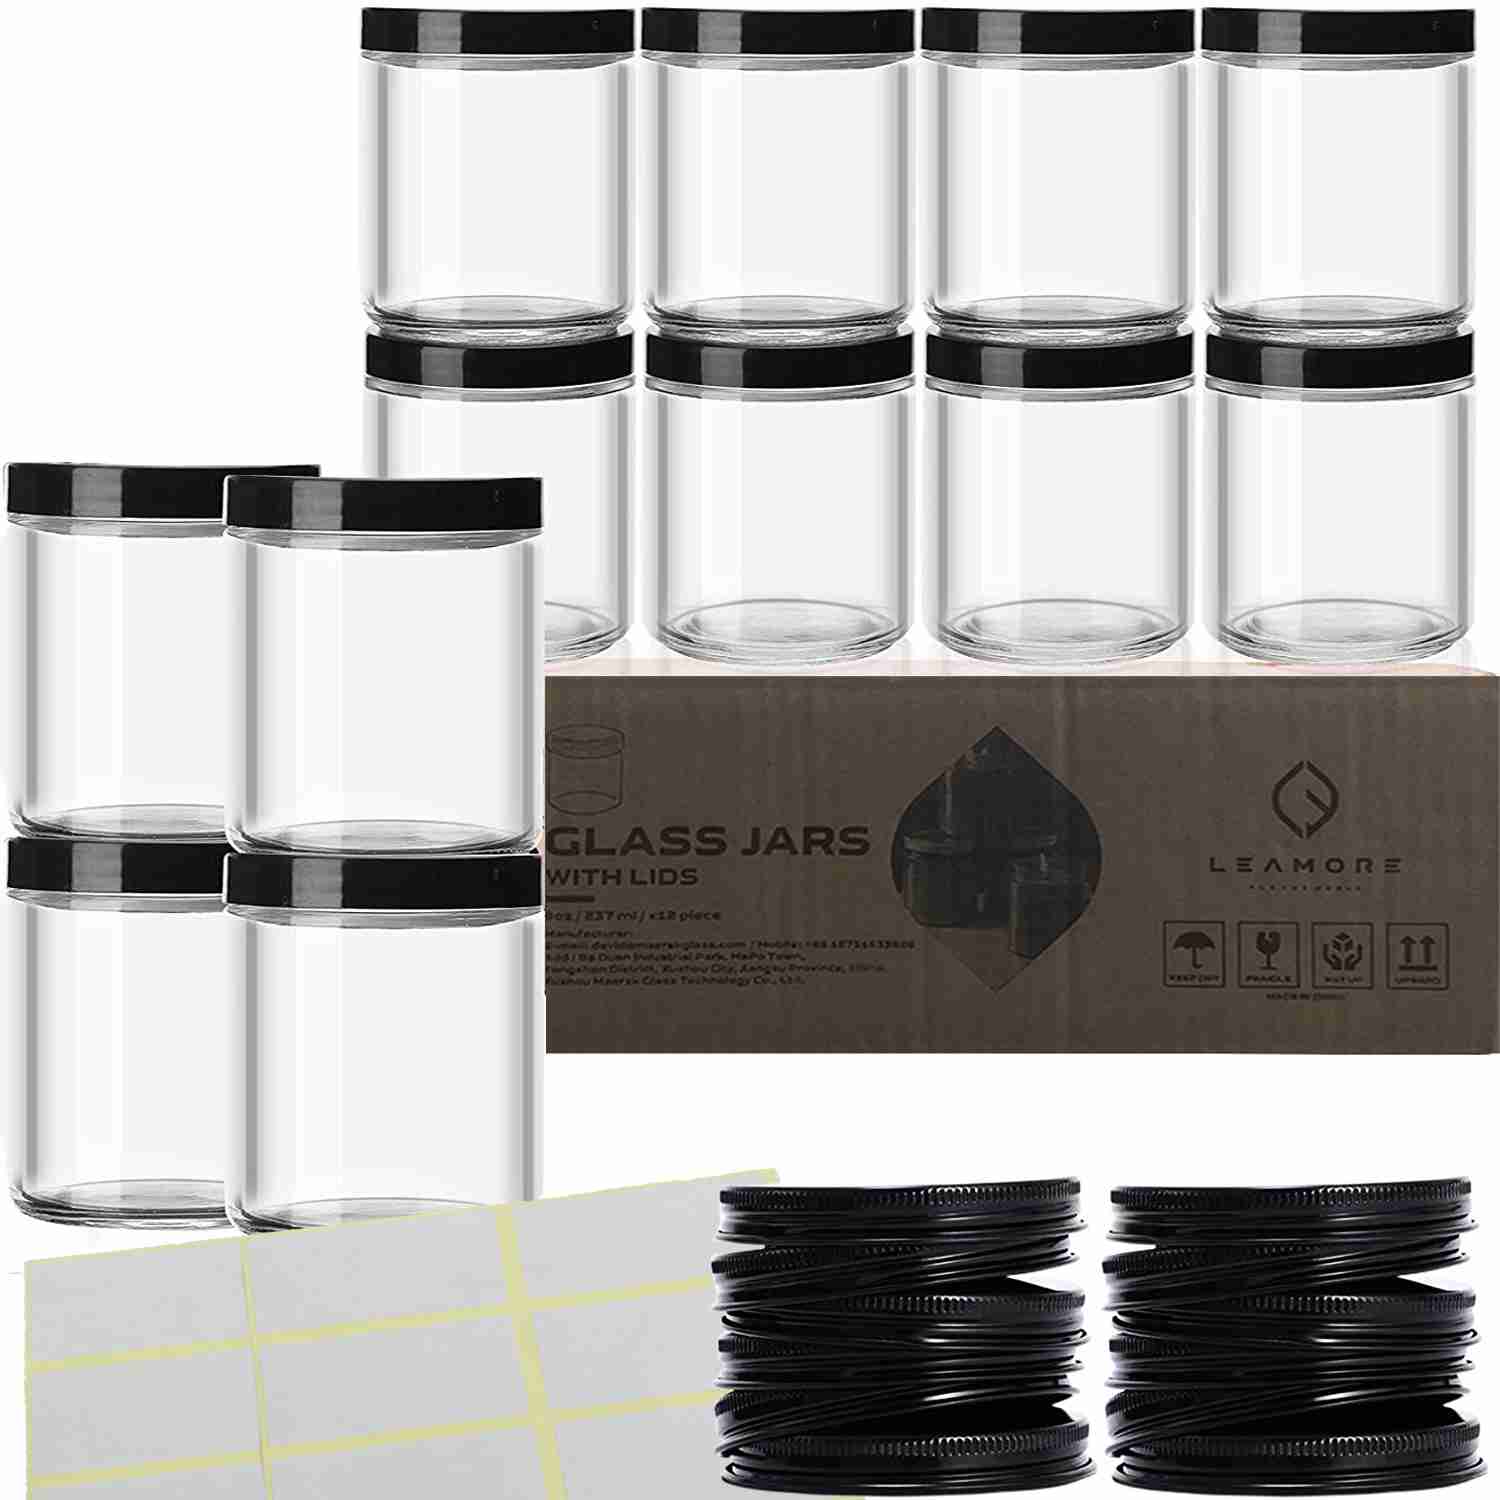 8-oz-glass-jars-with-lids with cash back rebate